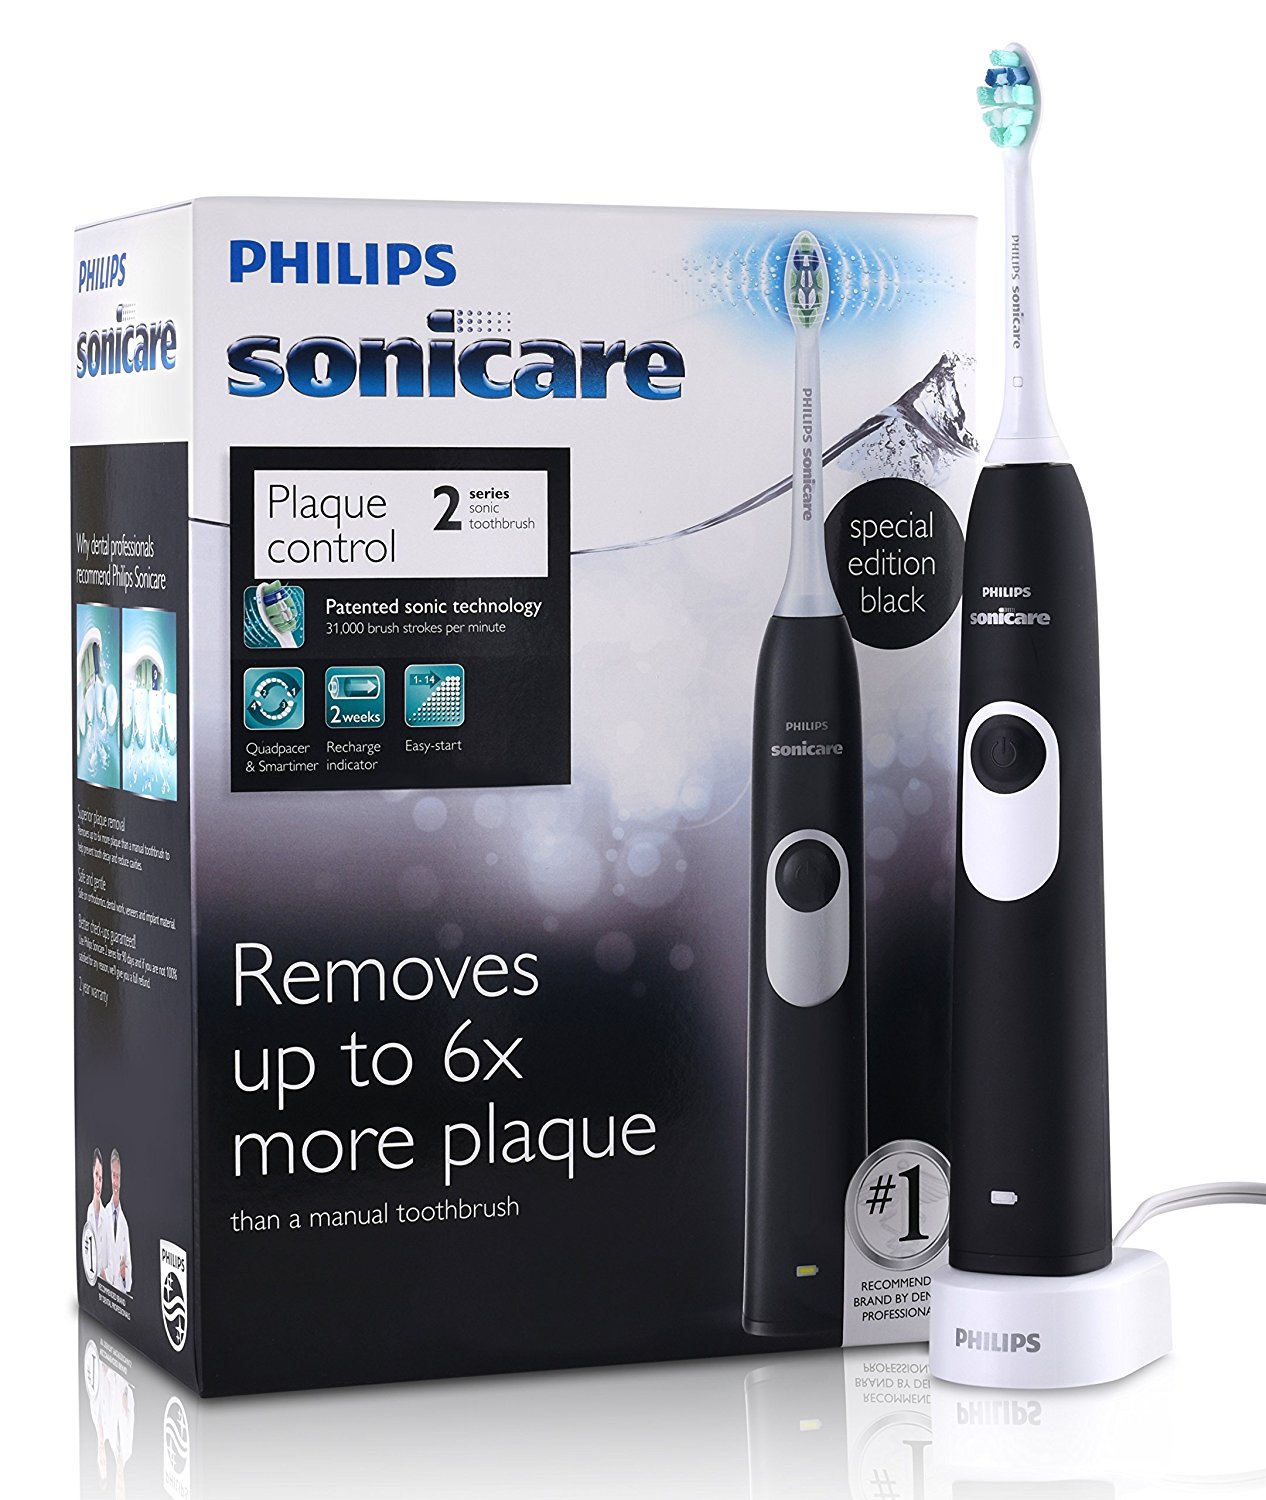 Ends soon! Philips Sonicare 2 Series rechargeable electric toothbrush for $20